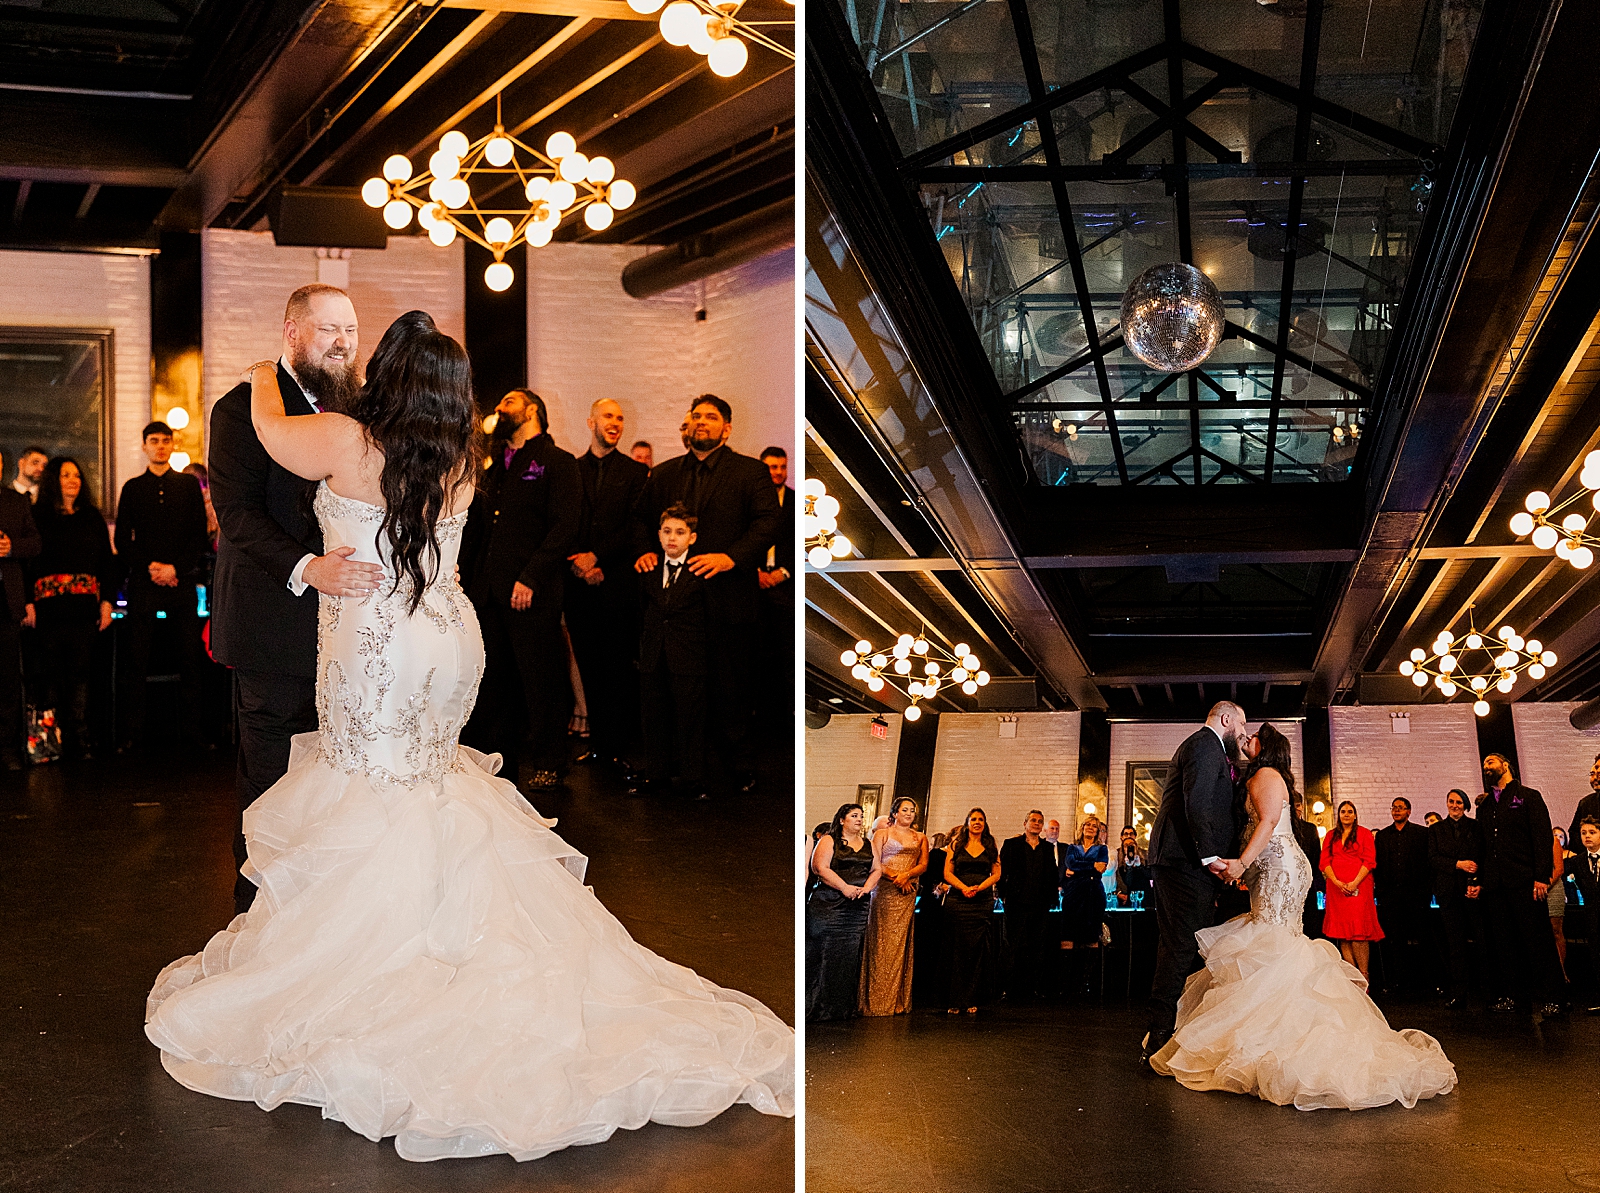 Left photo: Full shot of the groom smiling down at the bride as their share their first dance. 
Right photo: Full shot of the bride and groom sharing their first dance. 